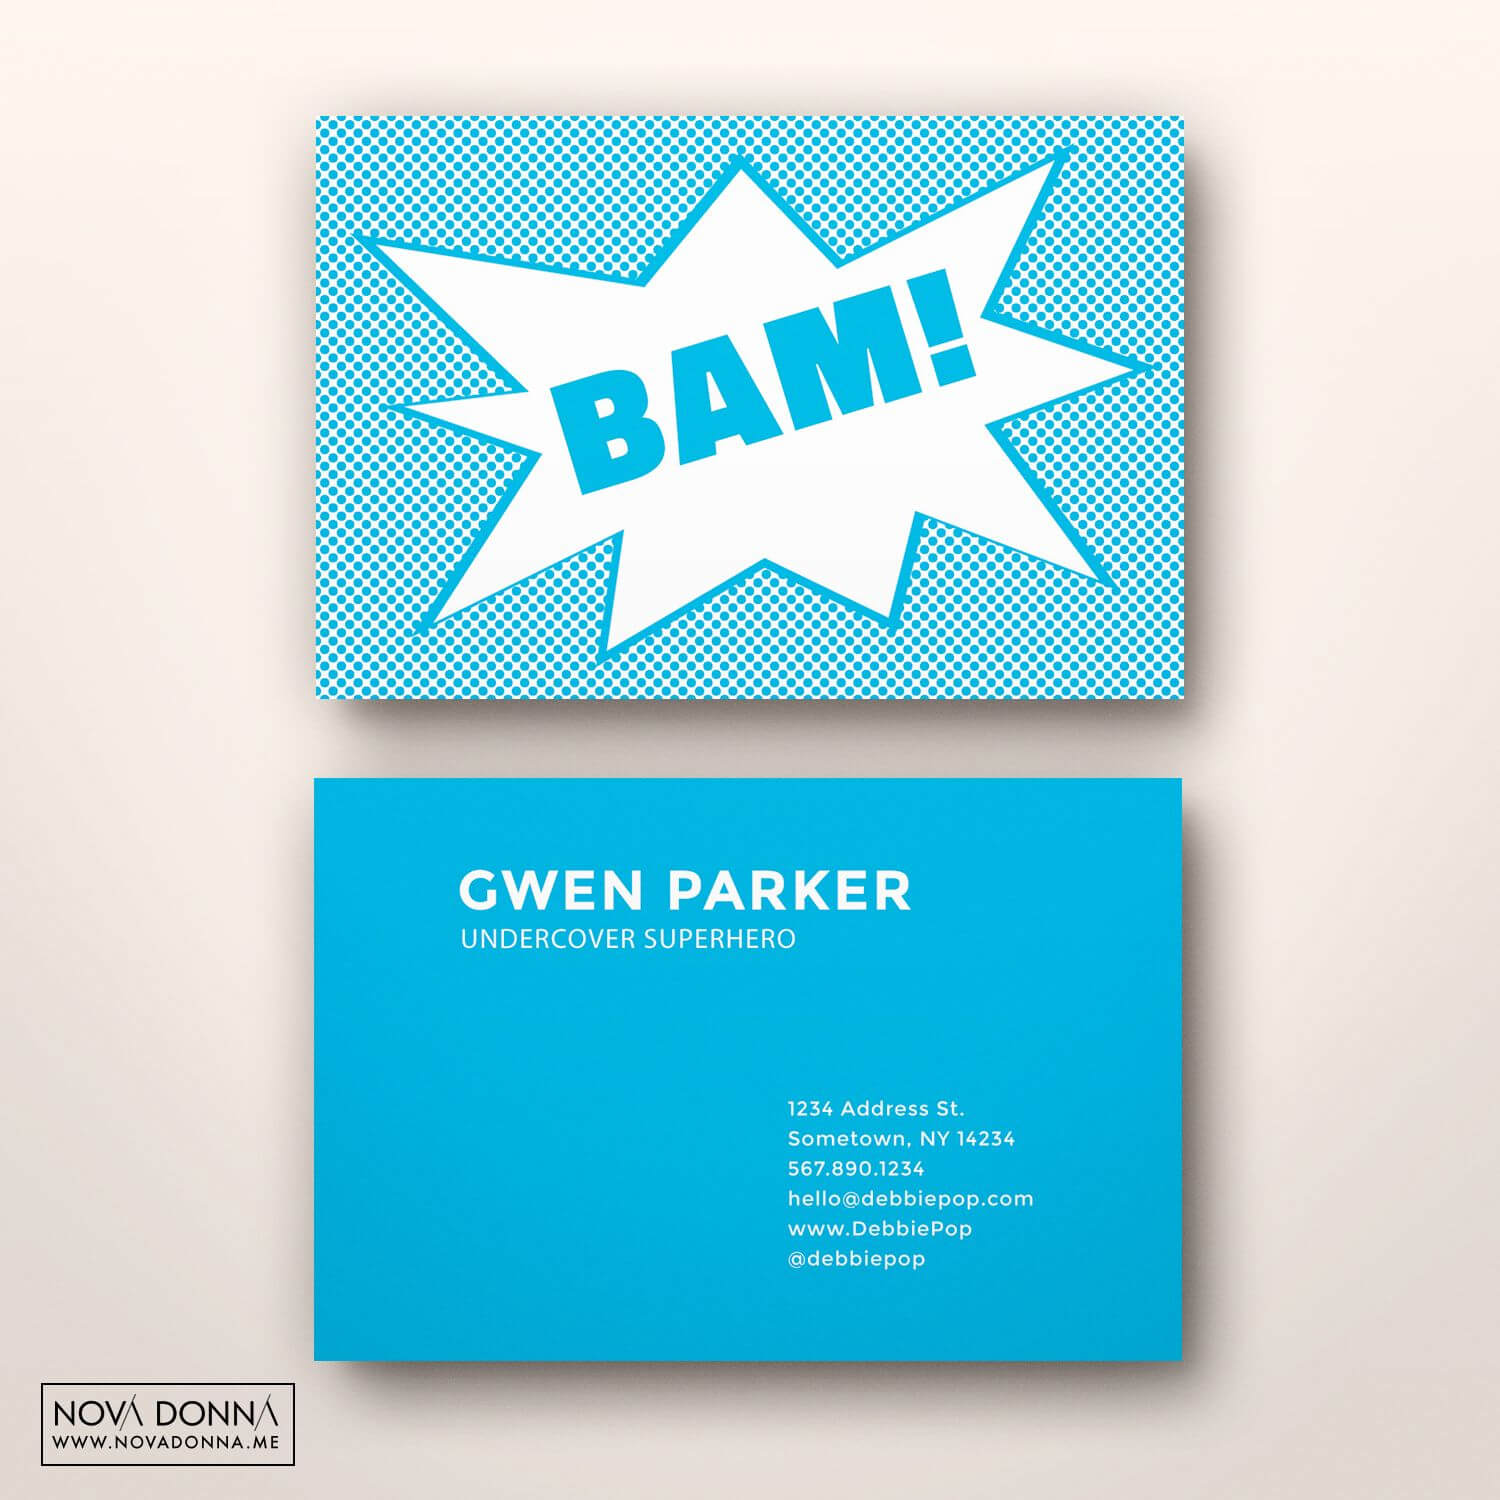 Business Card Template Designs | Business Card Template With Template For Calling Card